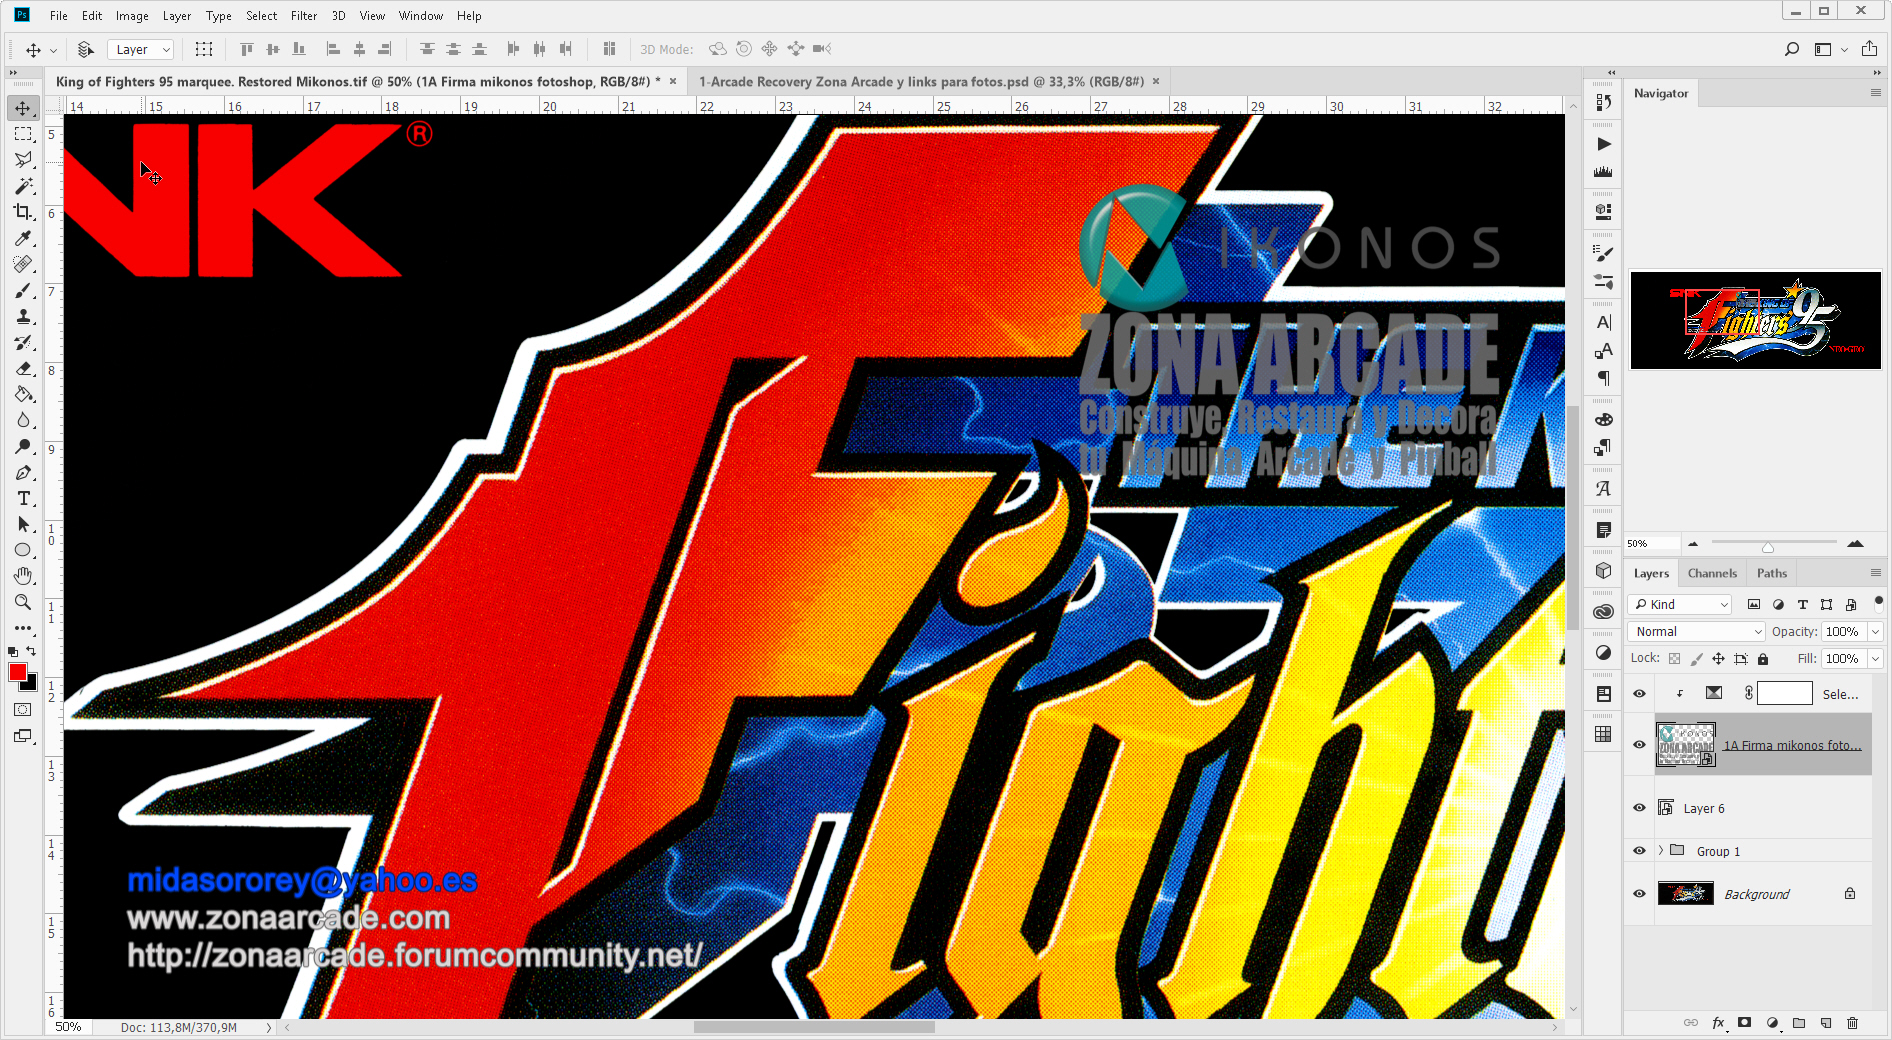 King-of-Fighters-95-marquee-Restored-Mikonos3